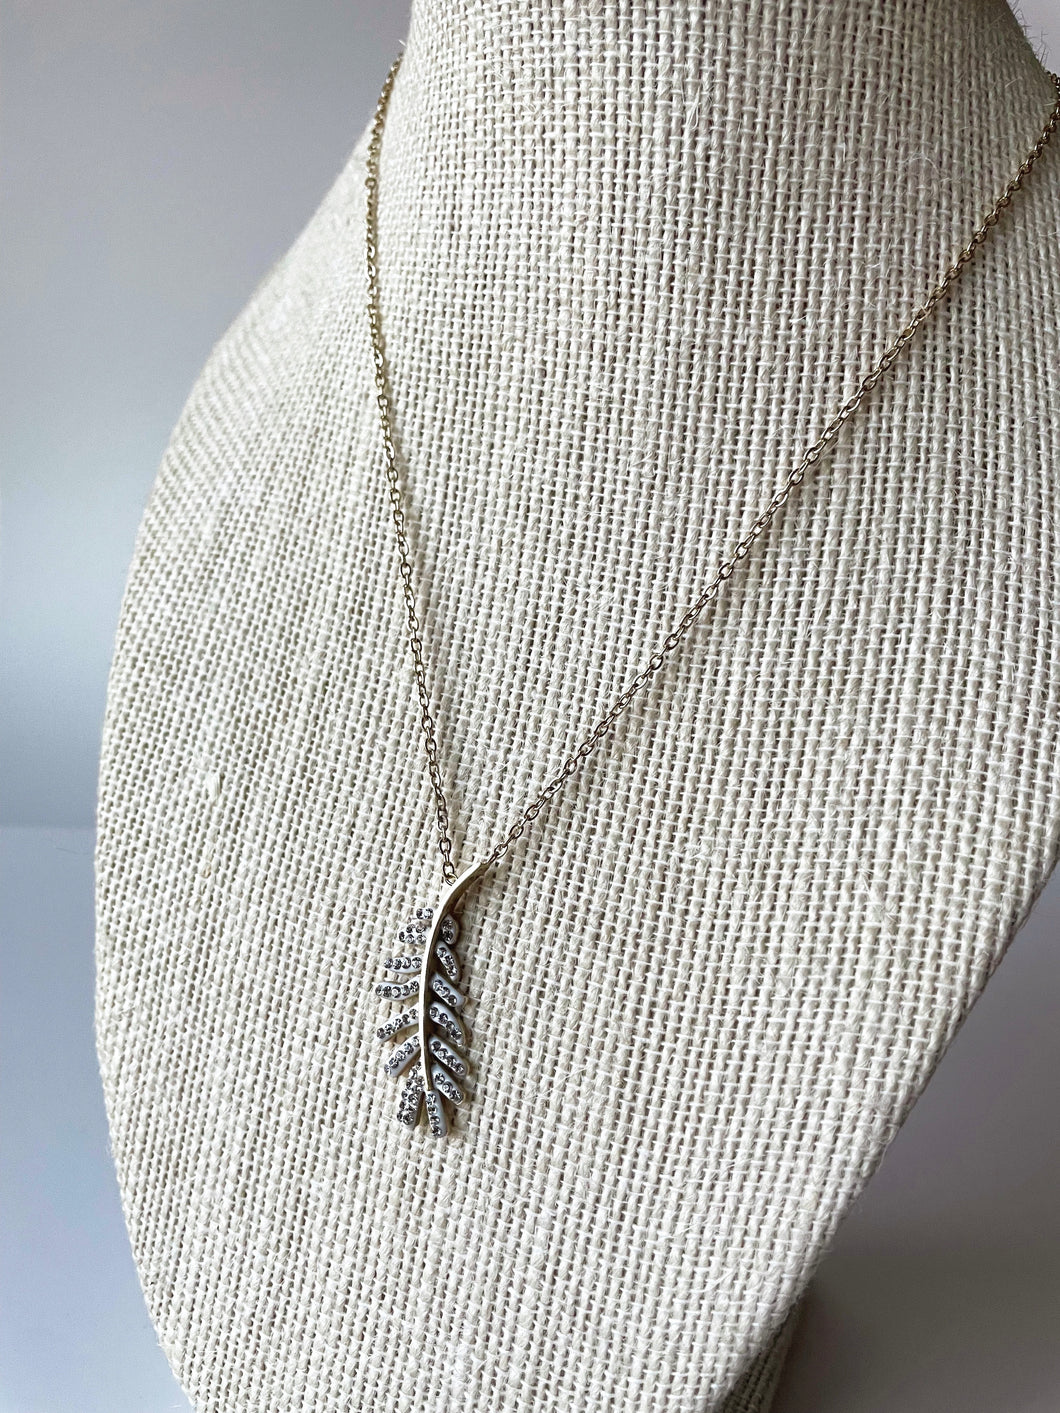 Stainless Steel Silver Leaf Necklace